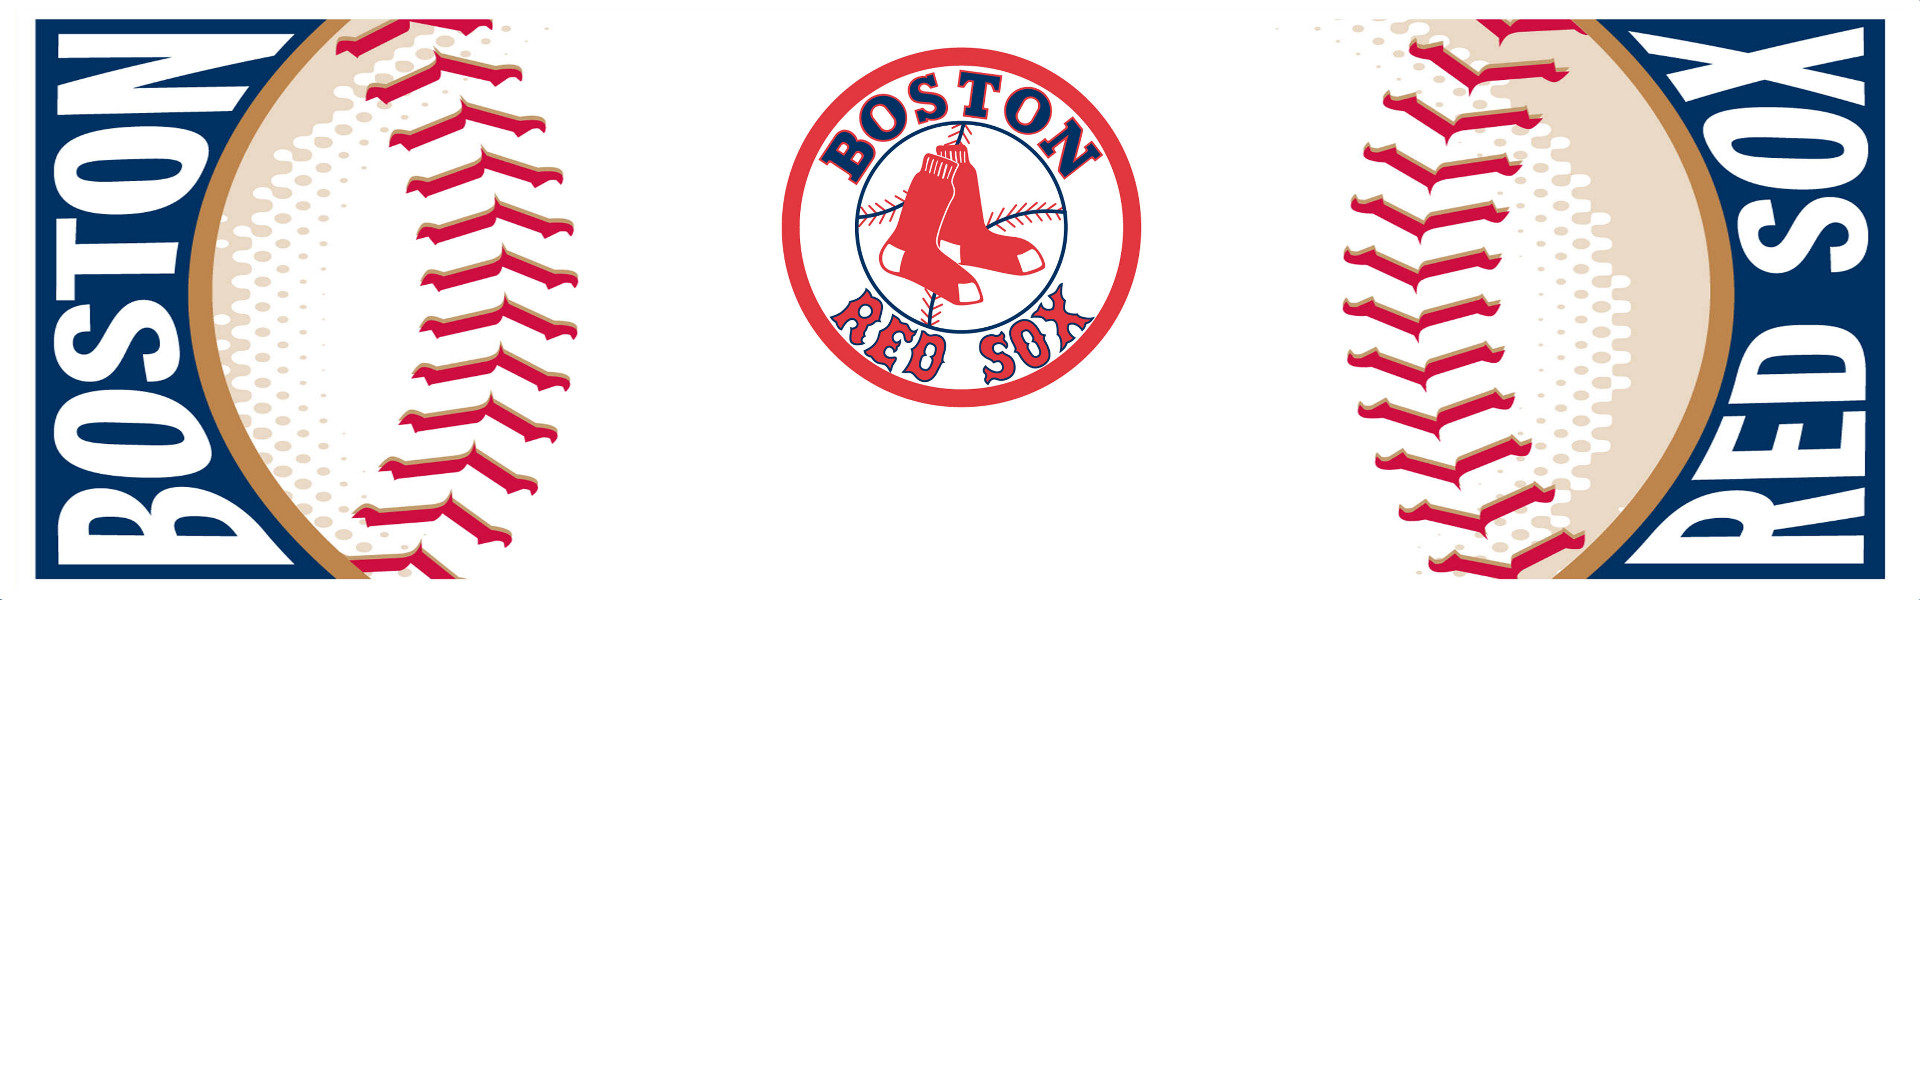 1920x1080 Download Boston Red Sox Wallpapers For iPhone, Desktop, Laptop, and Mobile.  Therefore you can save them directly to your PC or Phone.